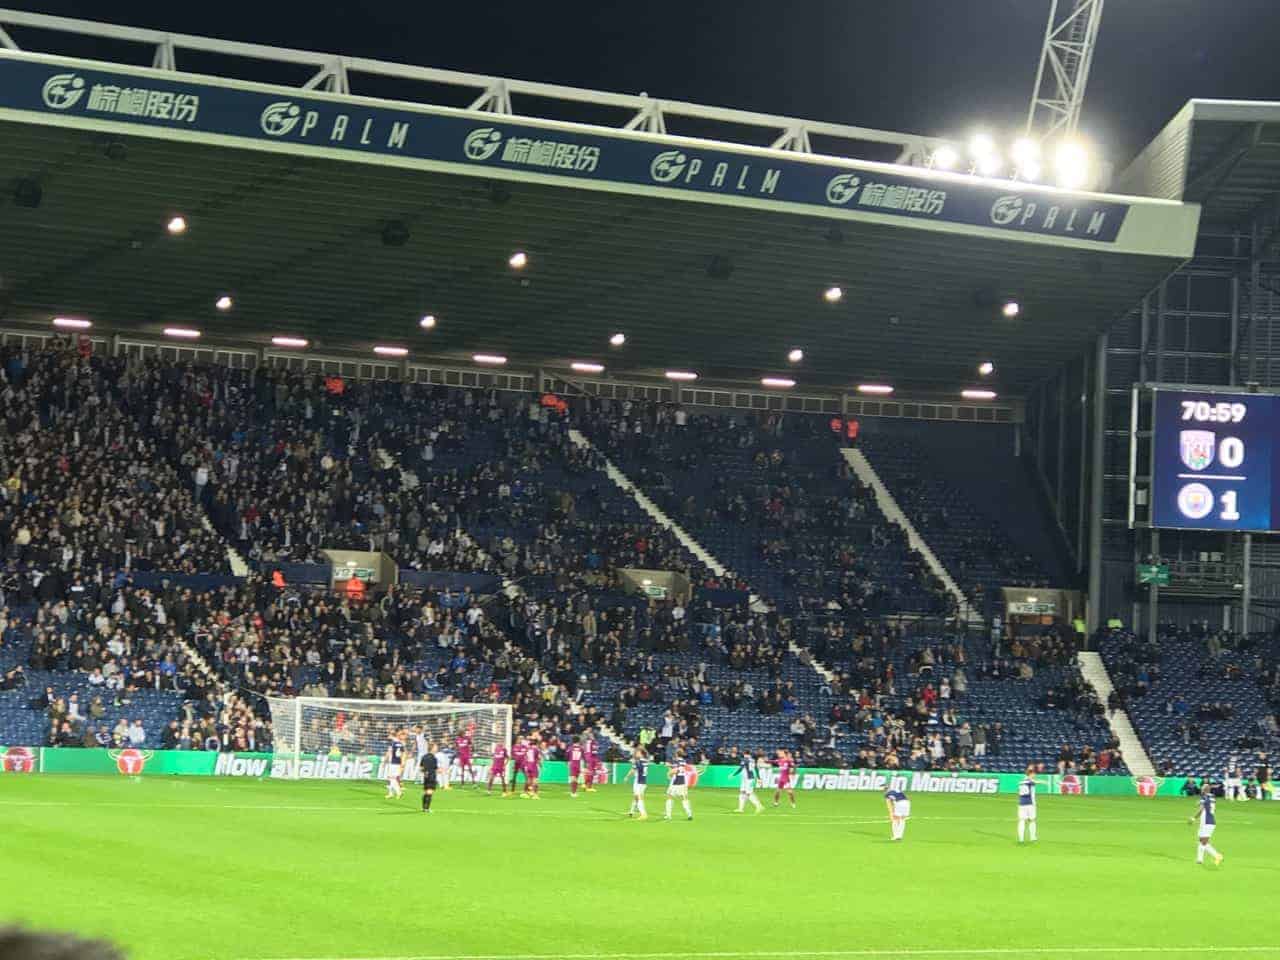 West Bromwich Albion fans watching a football game at The Hawthorns.